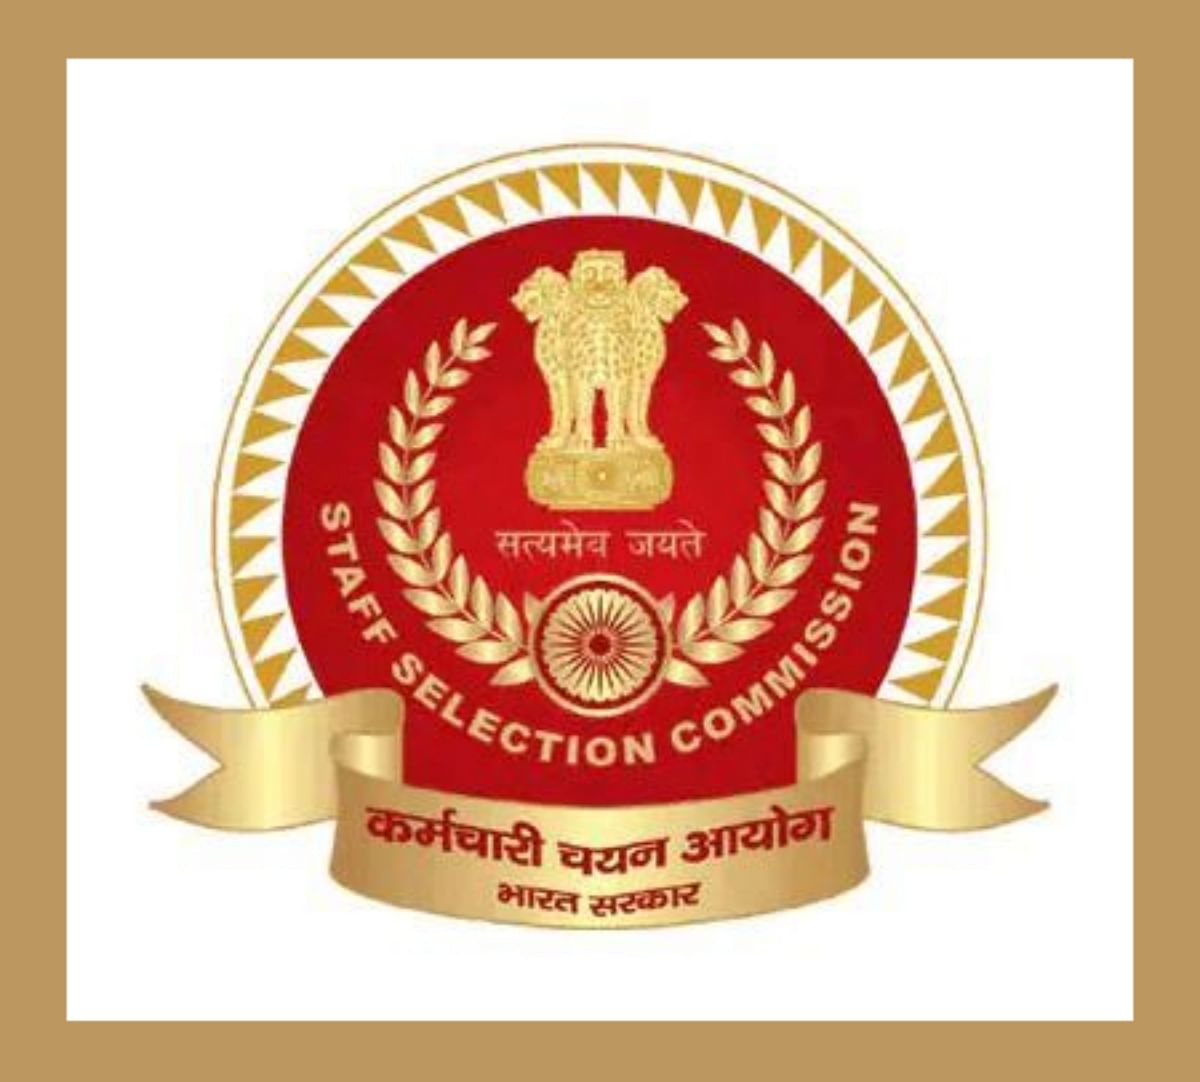 SSC CGL Tier III, MTS, and Junior Engineer Result Dates Announced, Details Here